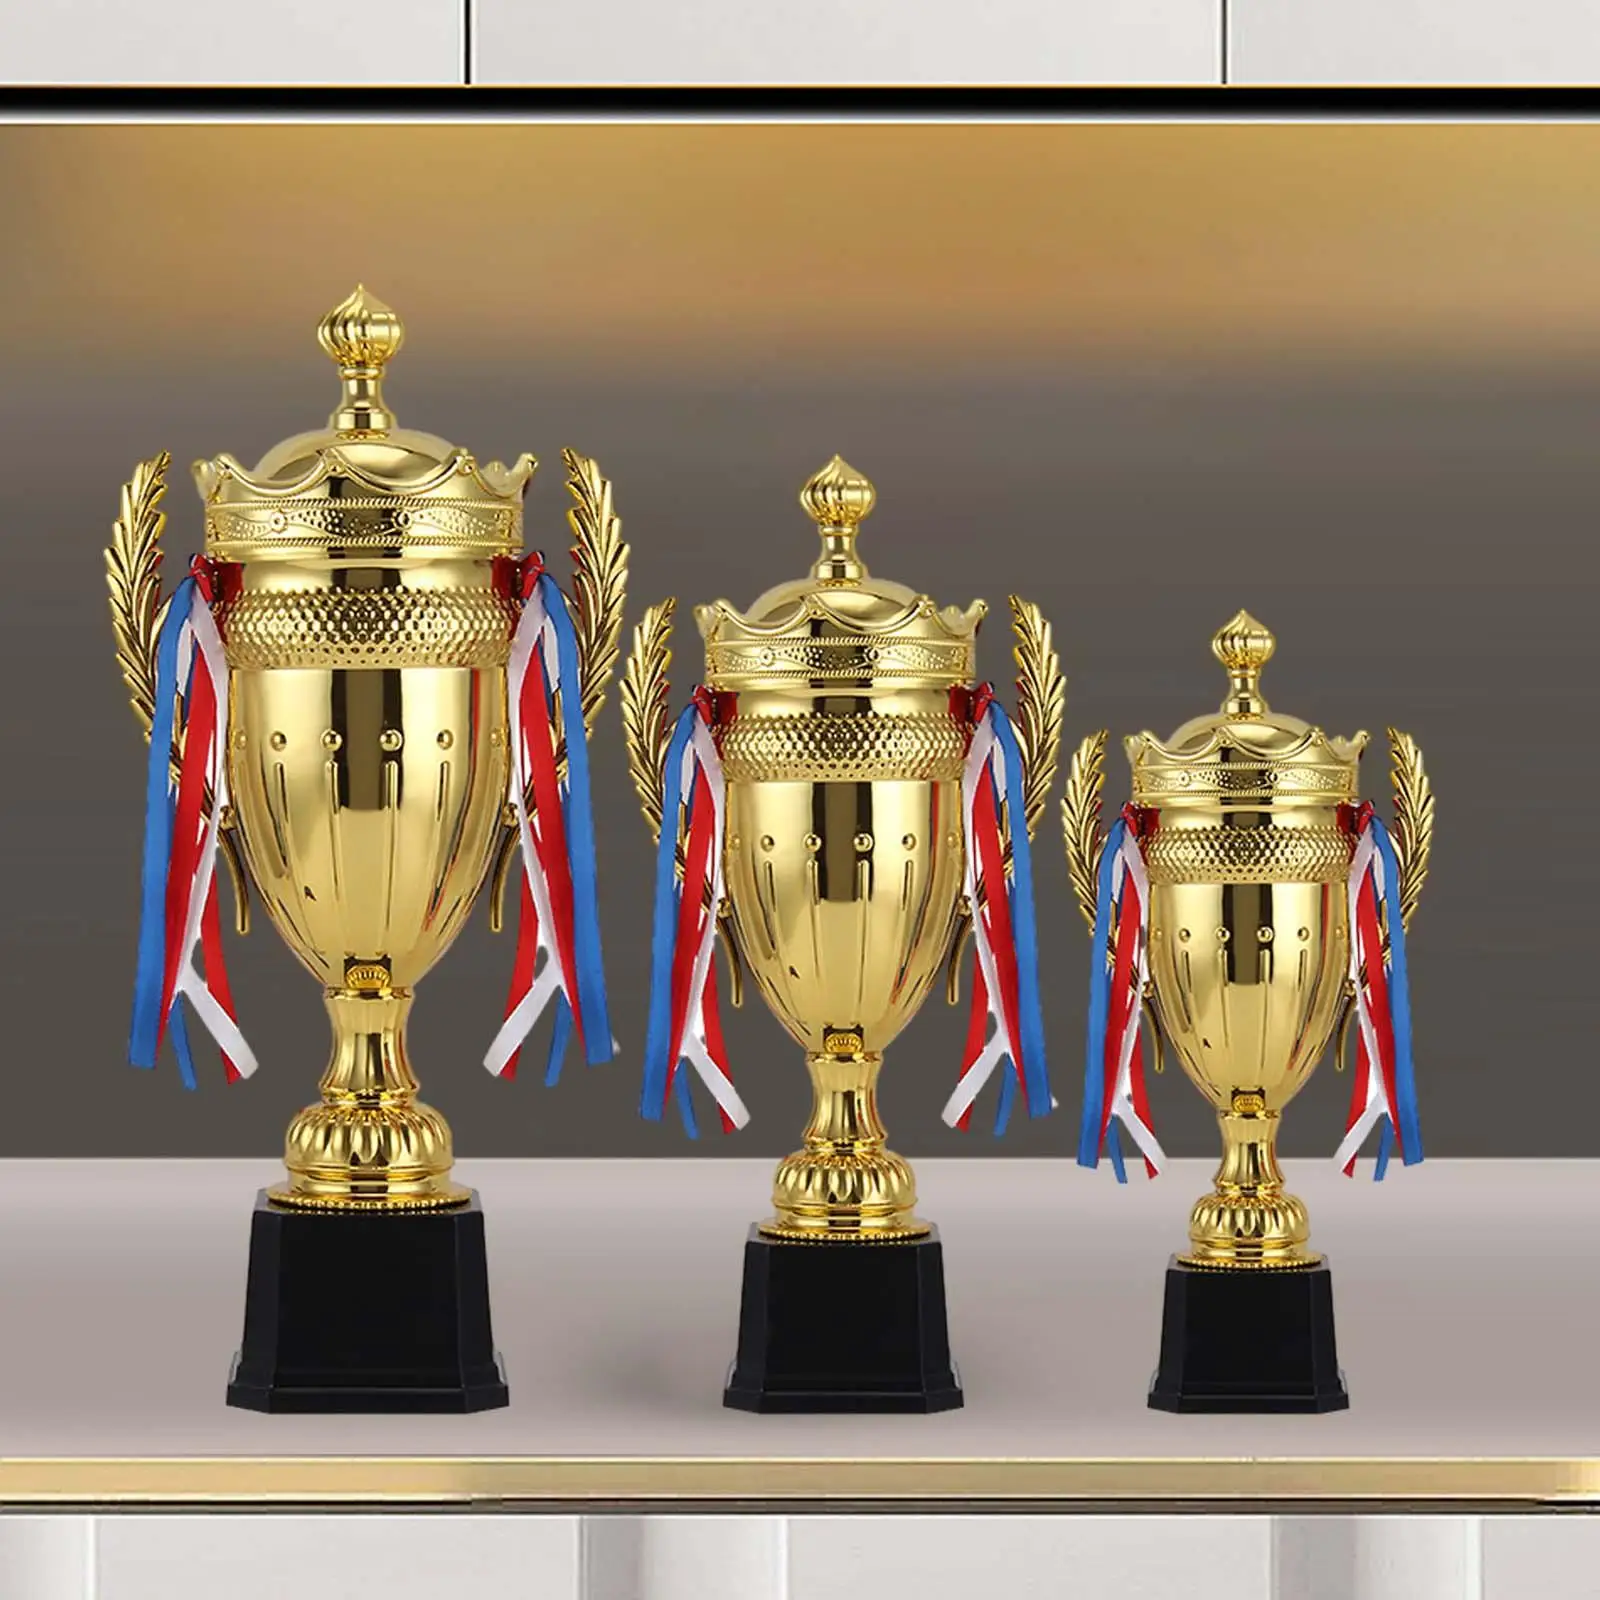 Adults Trophy Creative Trophy Cup Award Trophy Cup for Competitions Sports Championships Celebrations Party Favors